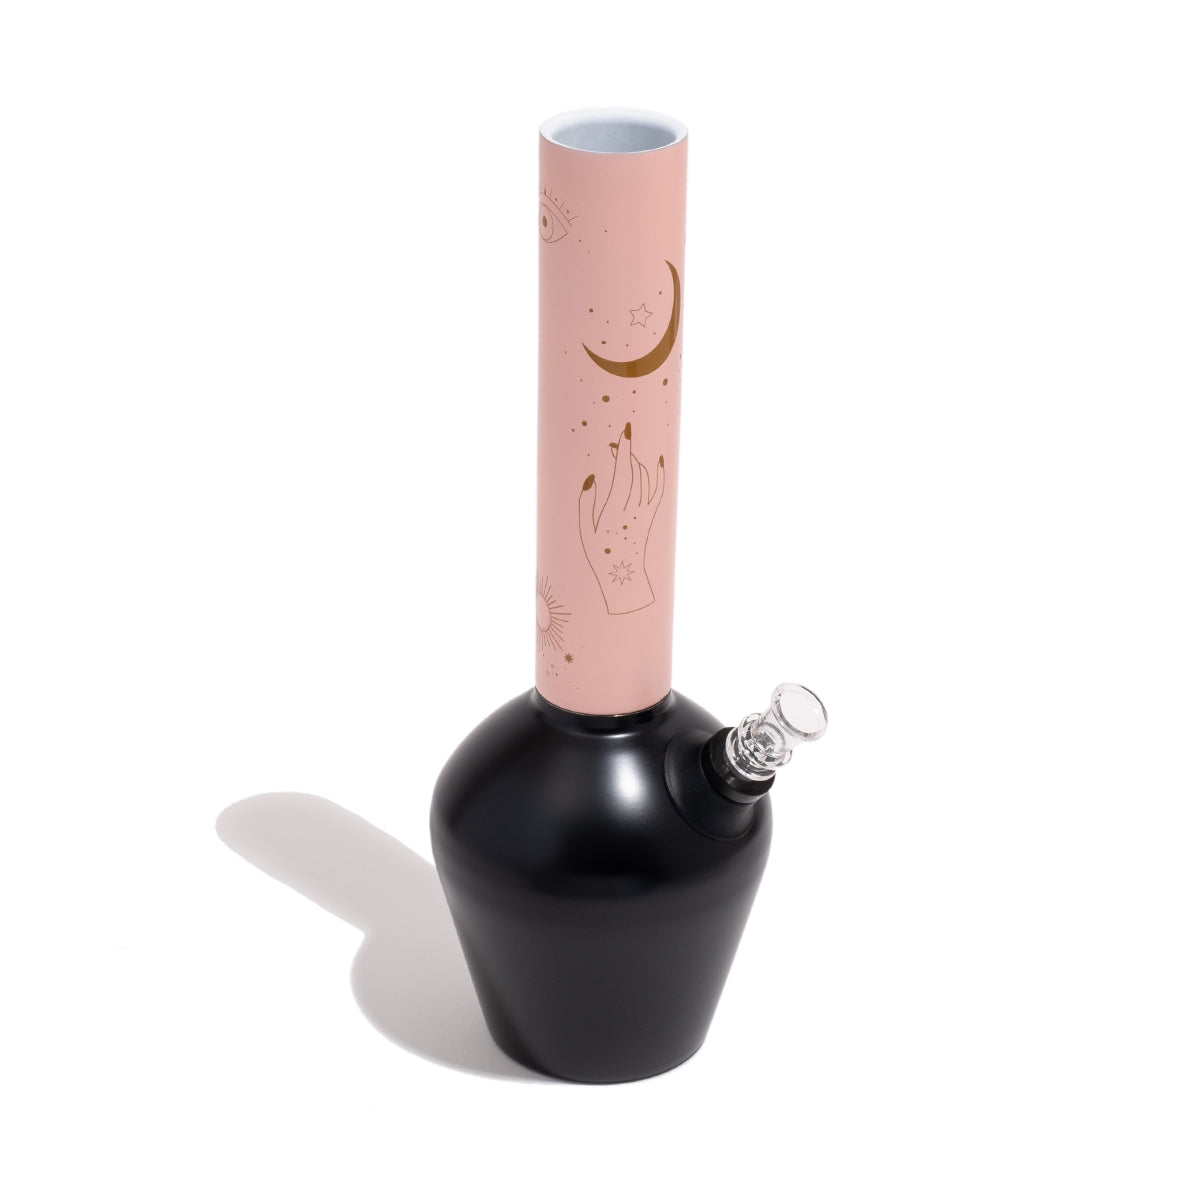 Chill Steel Pipes - Matte Pink Celestial Neckpiece for Bong, Side View on White